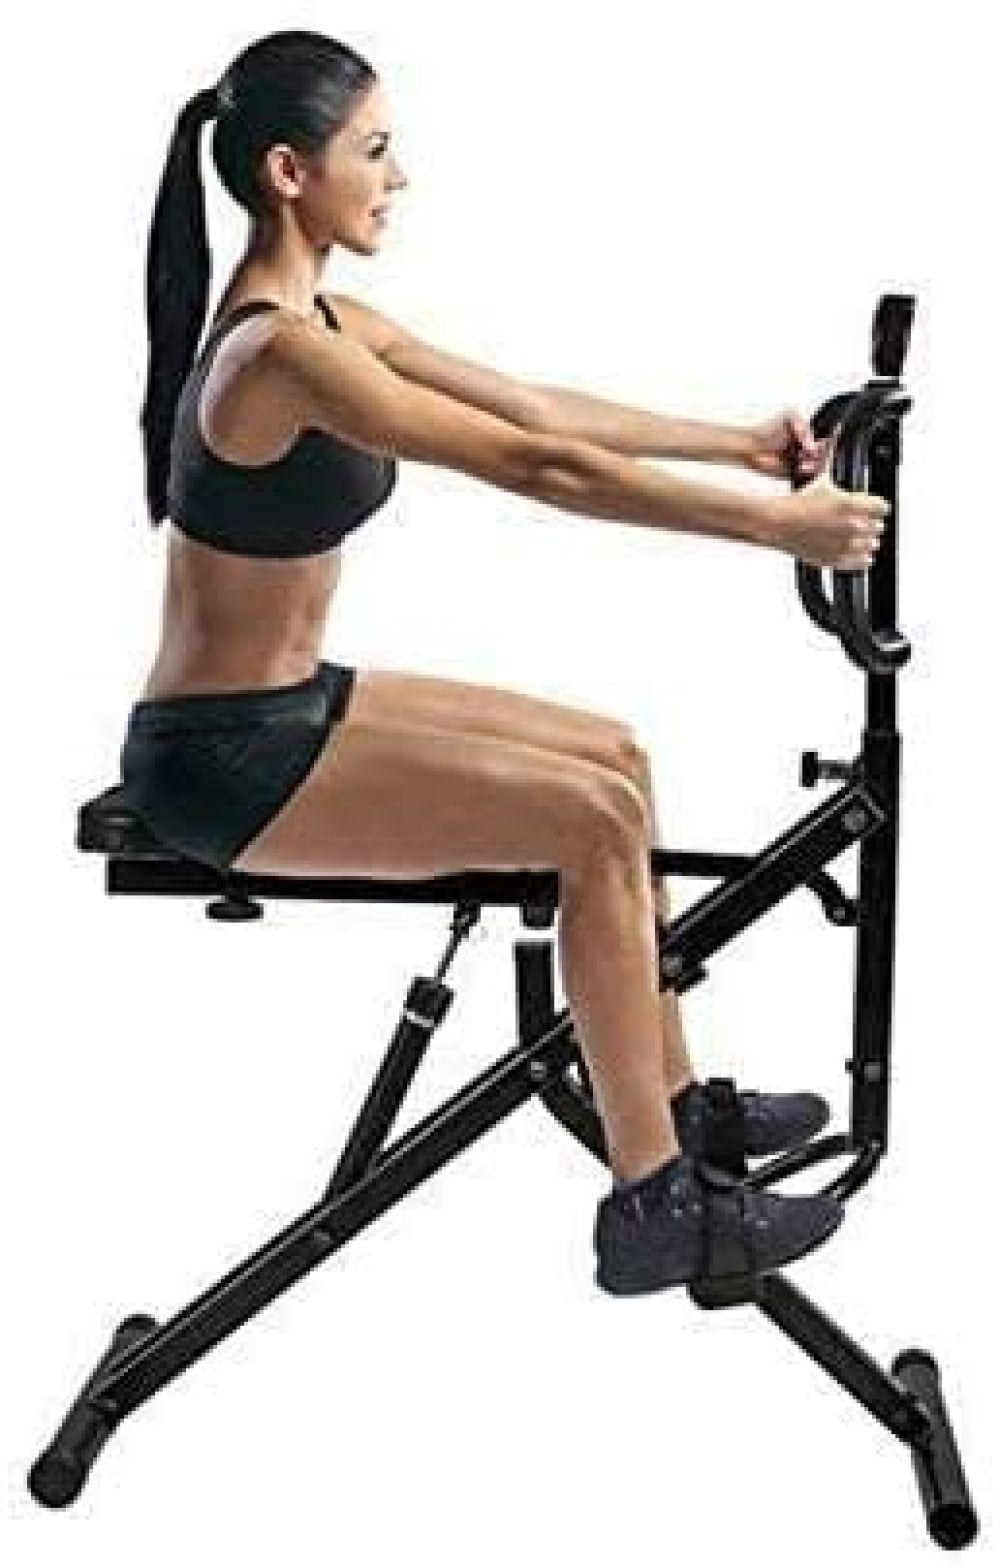 Details about   Total Crunch Power Rider Fitness Abdo Cruncher Abs Exercise Full Body Workout 